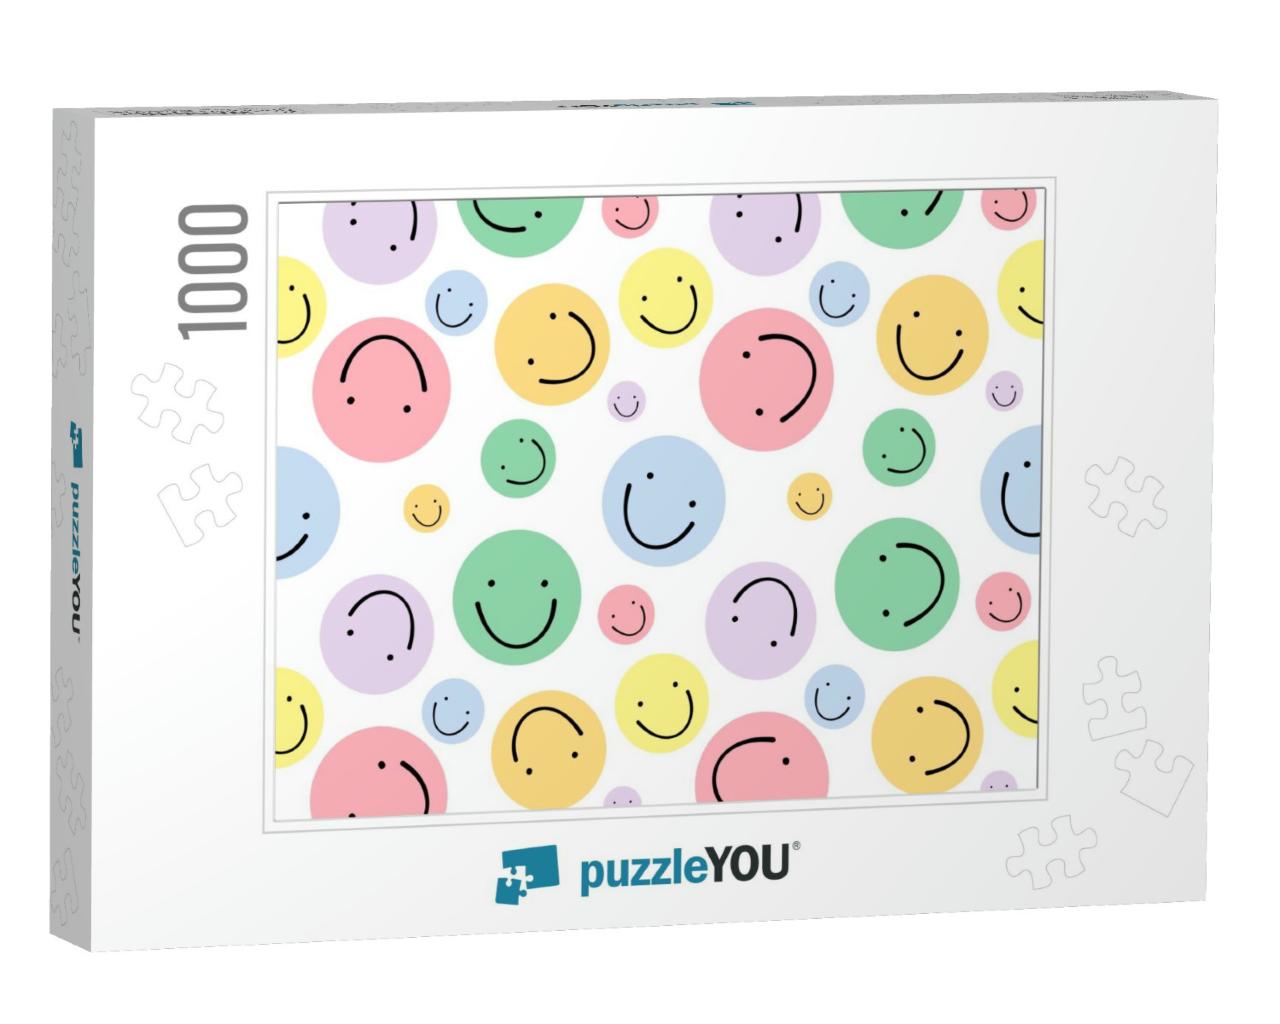 Beautiful Multicolored Smiley Emoji Background Pattern on... Jigsaw Puzzle with 1000 pieces